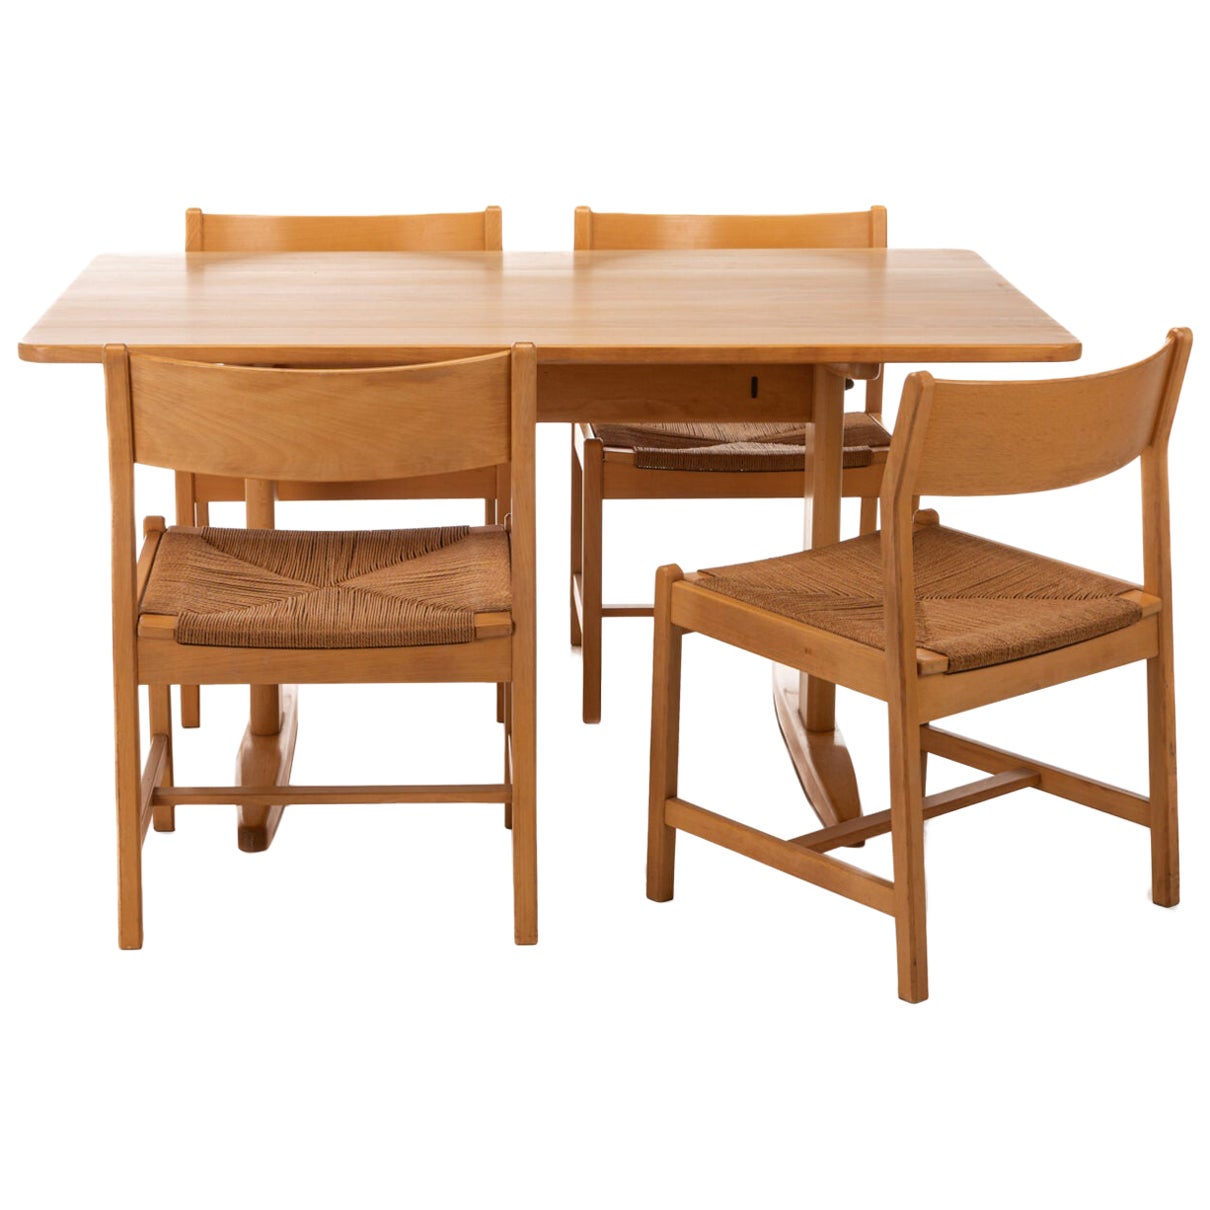 Dining Set in Beech and Papercord by Børge Mogensen for C.M. Madsen, Denmark